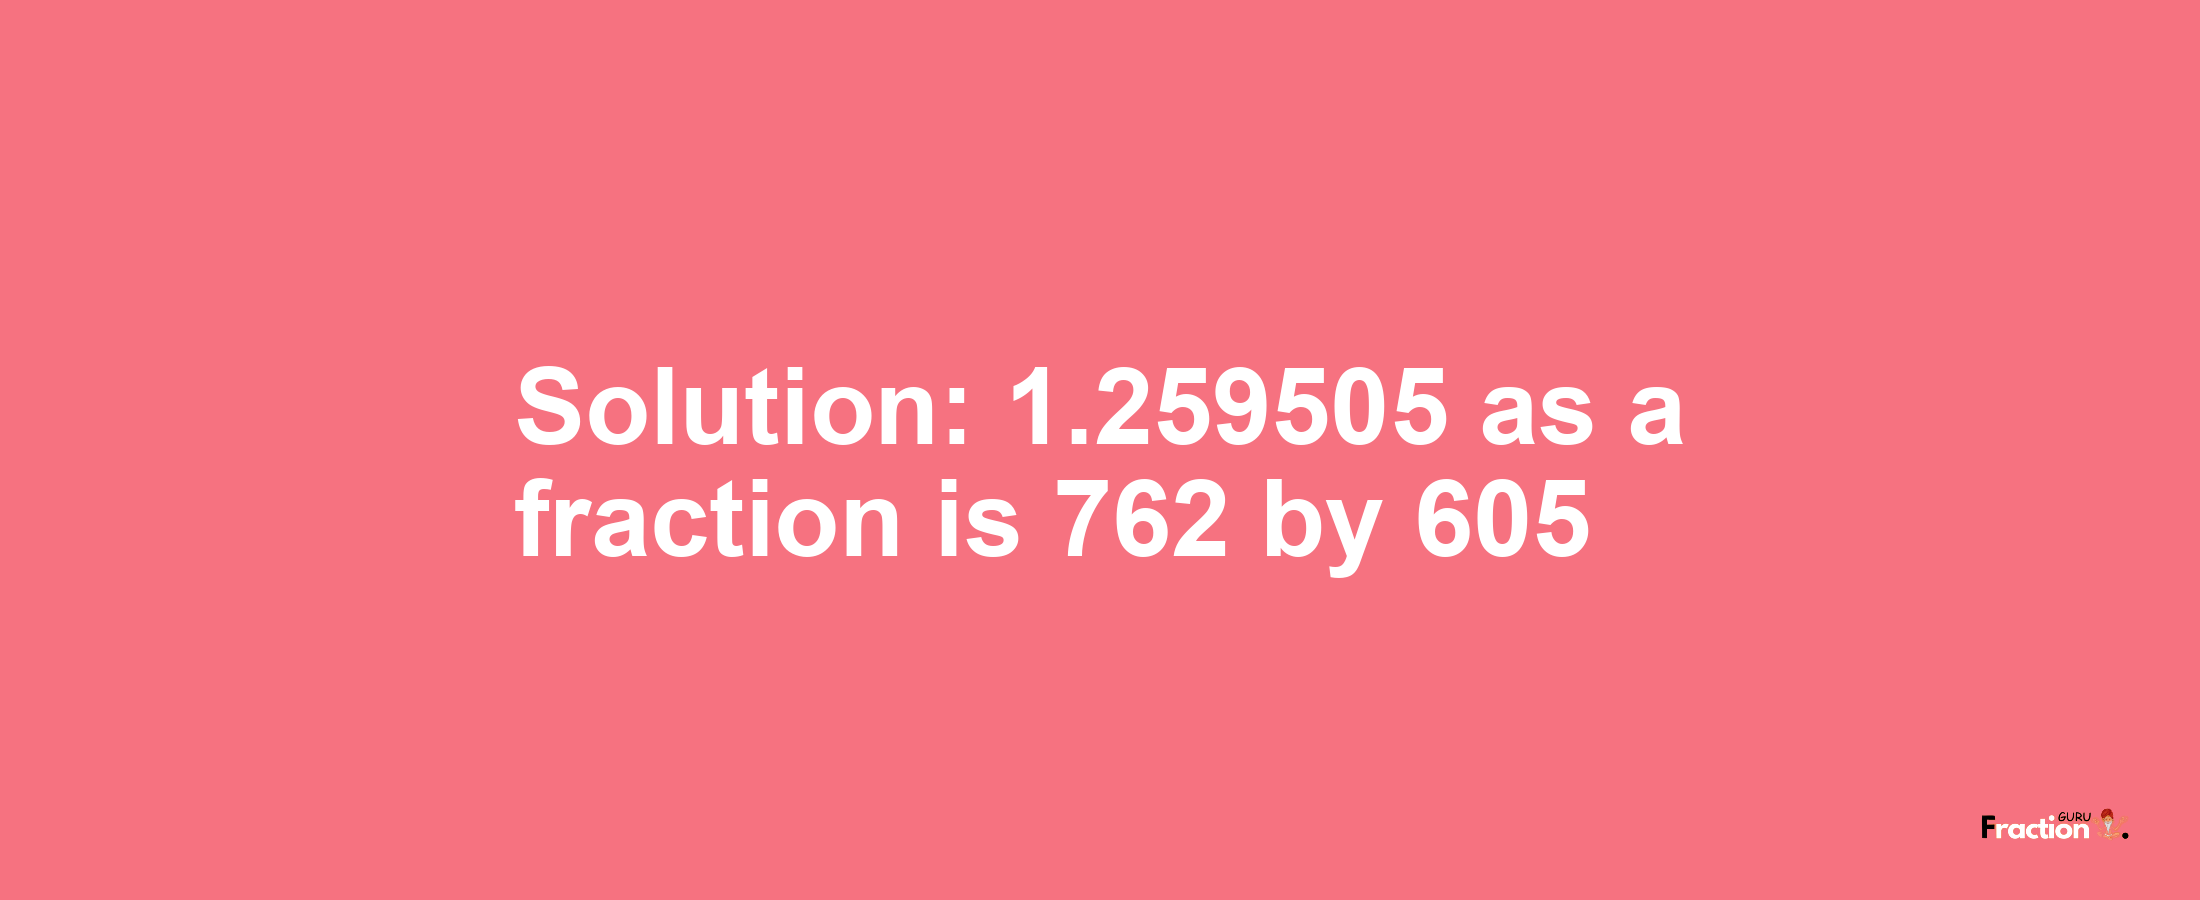 Solution:1.259505 as a fraction is 762/605